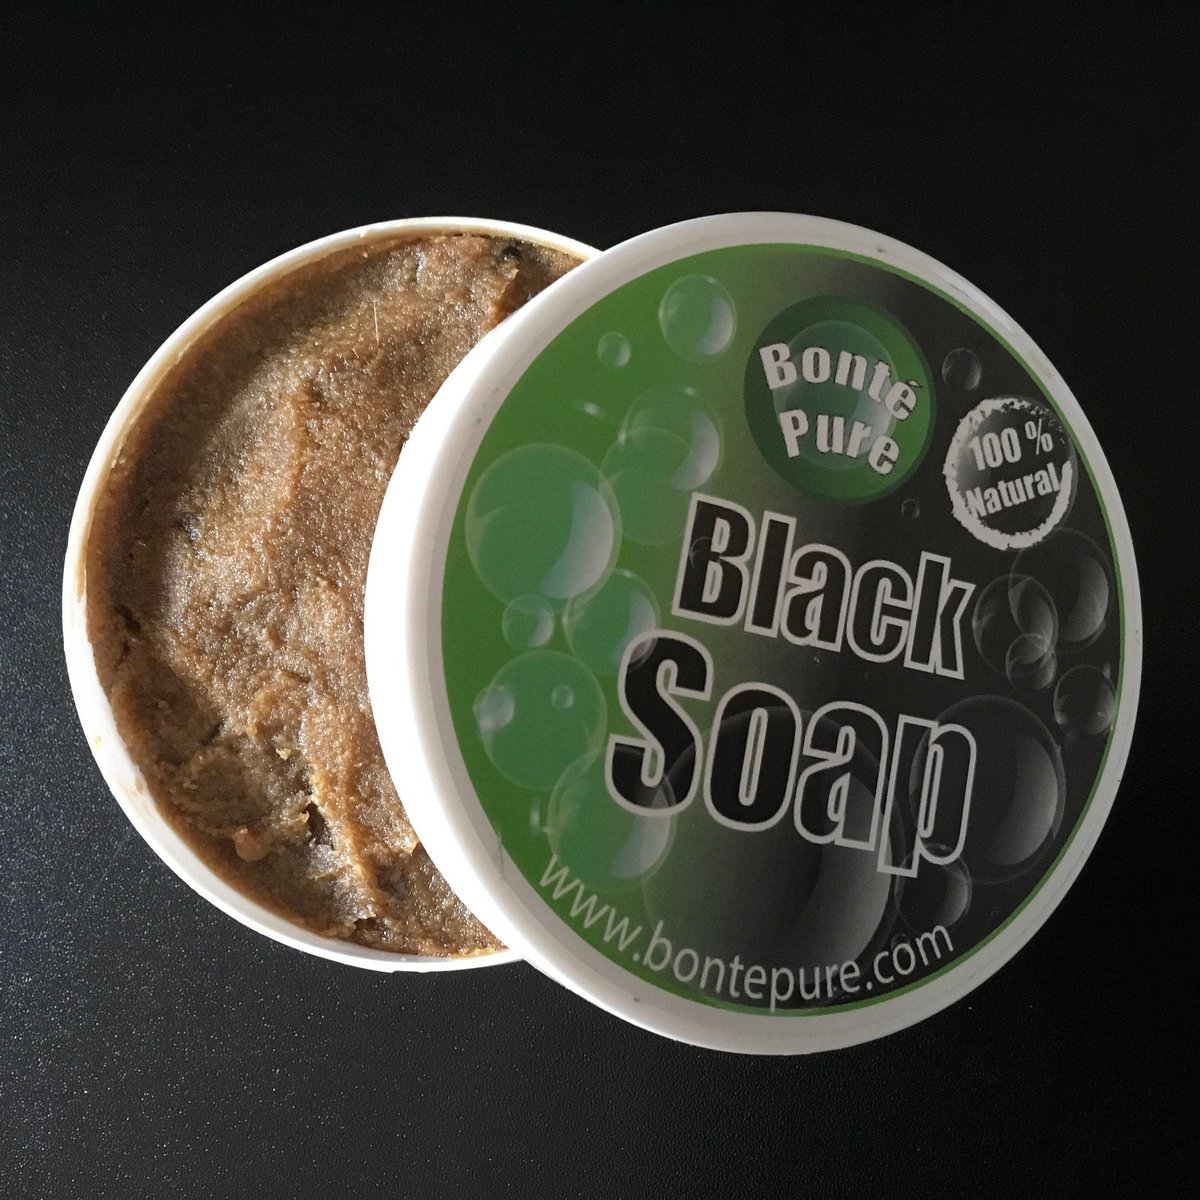 Thanks for the kind words! ★★★★★ 'We love this soap, skin has never felt so soft and smooth' mary m. etsy.me/3wBQnxV #etsy #natural #organic #razorbump #eczema #acne #africa #blackbusiness #gifts #bathandbody